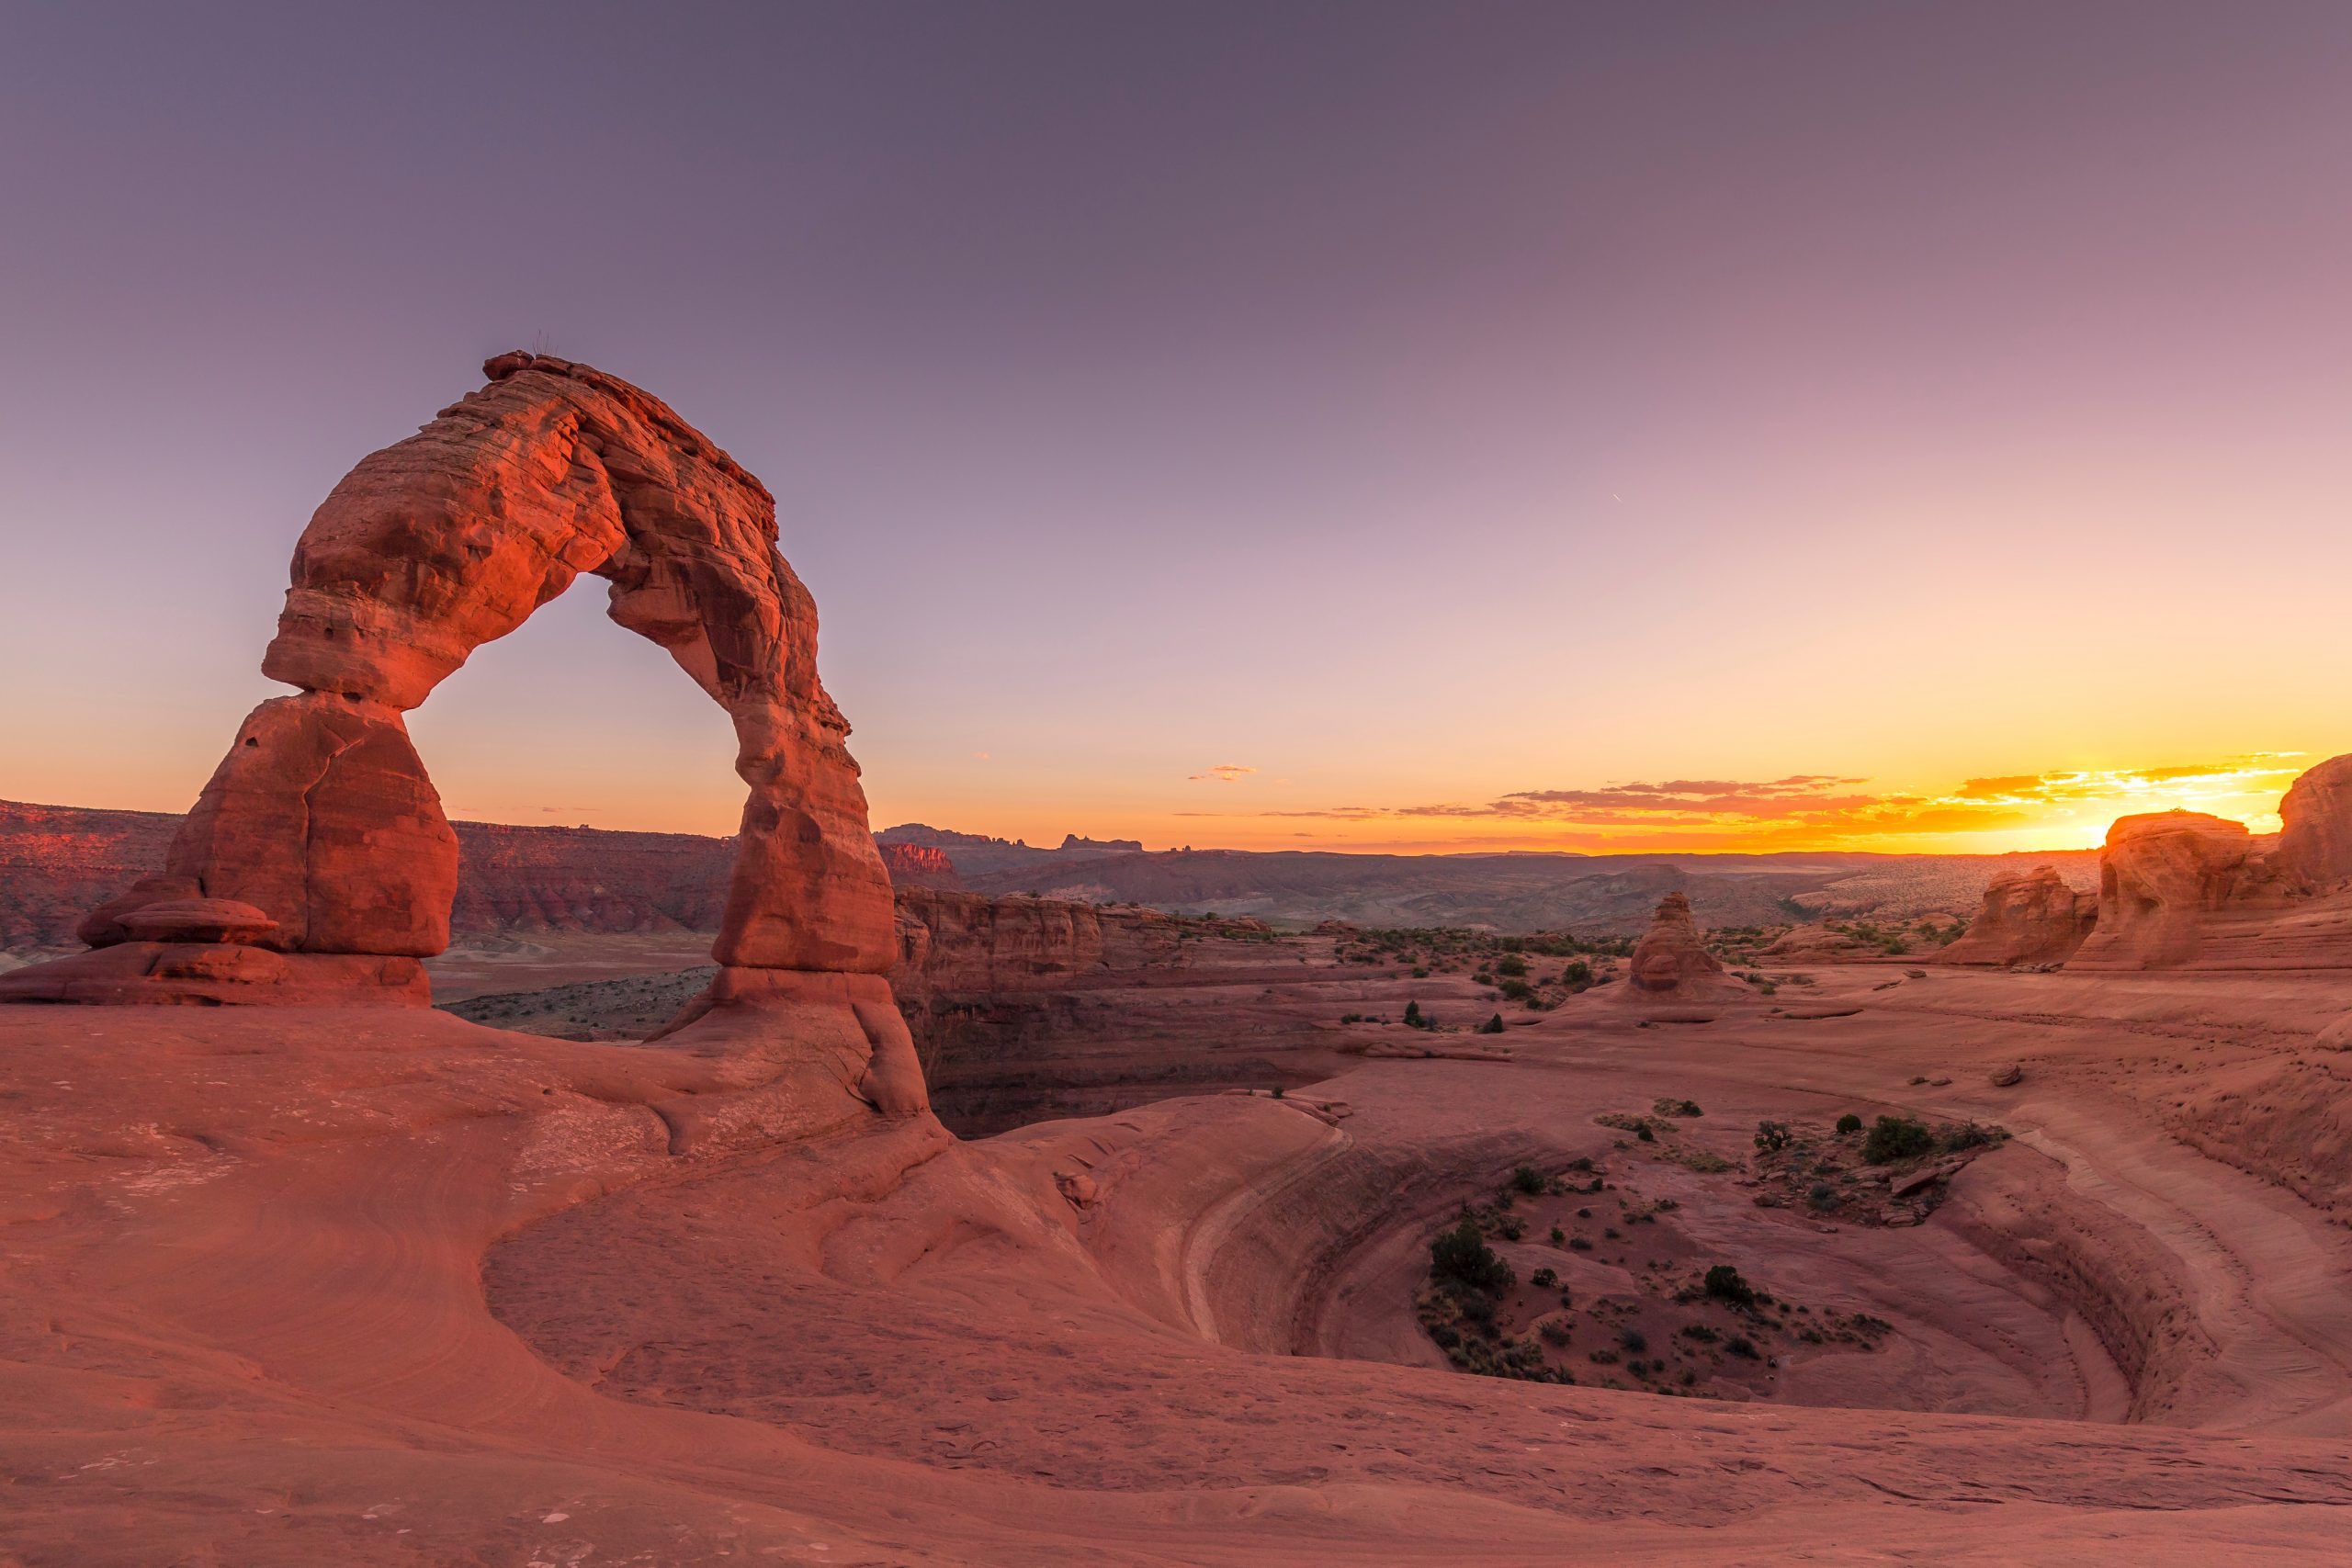 Sunrise at Delicate Arch Trail, Moab, UT, USA - - Best National Parks in America